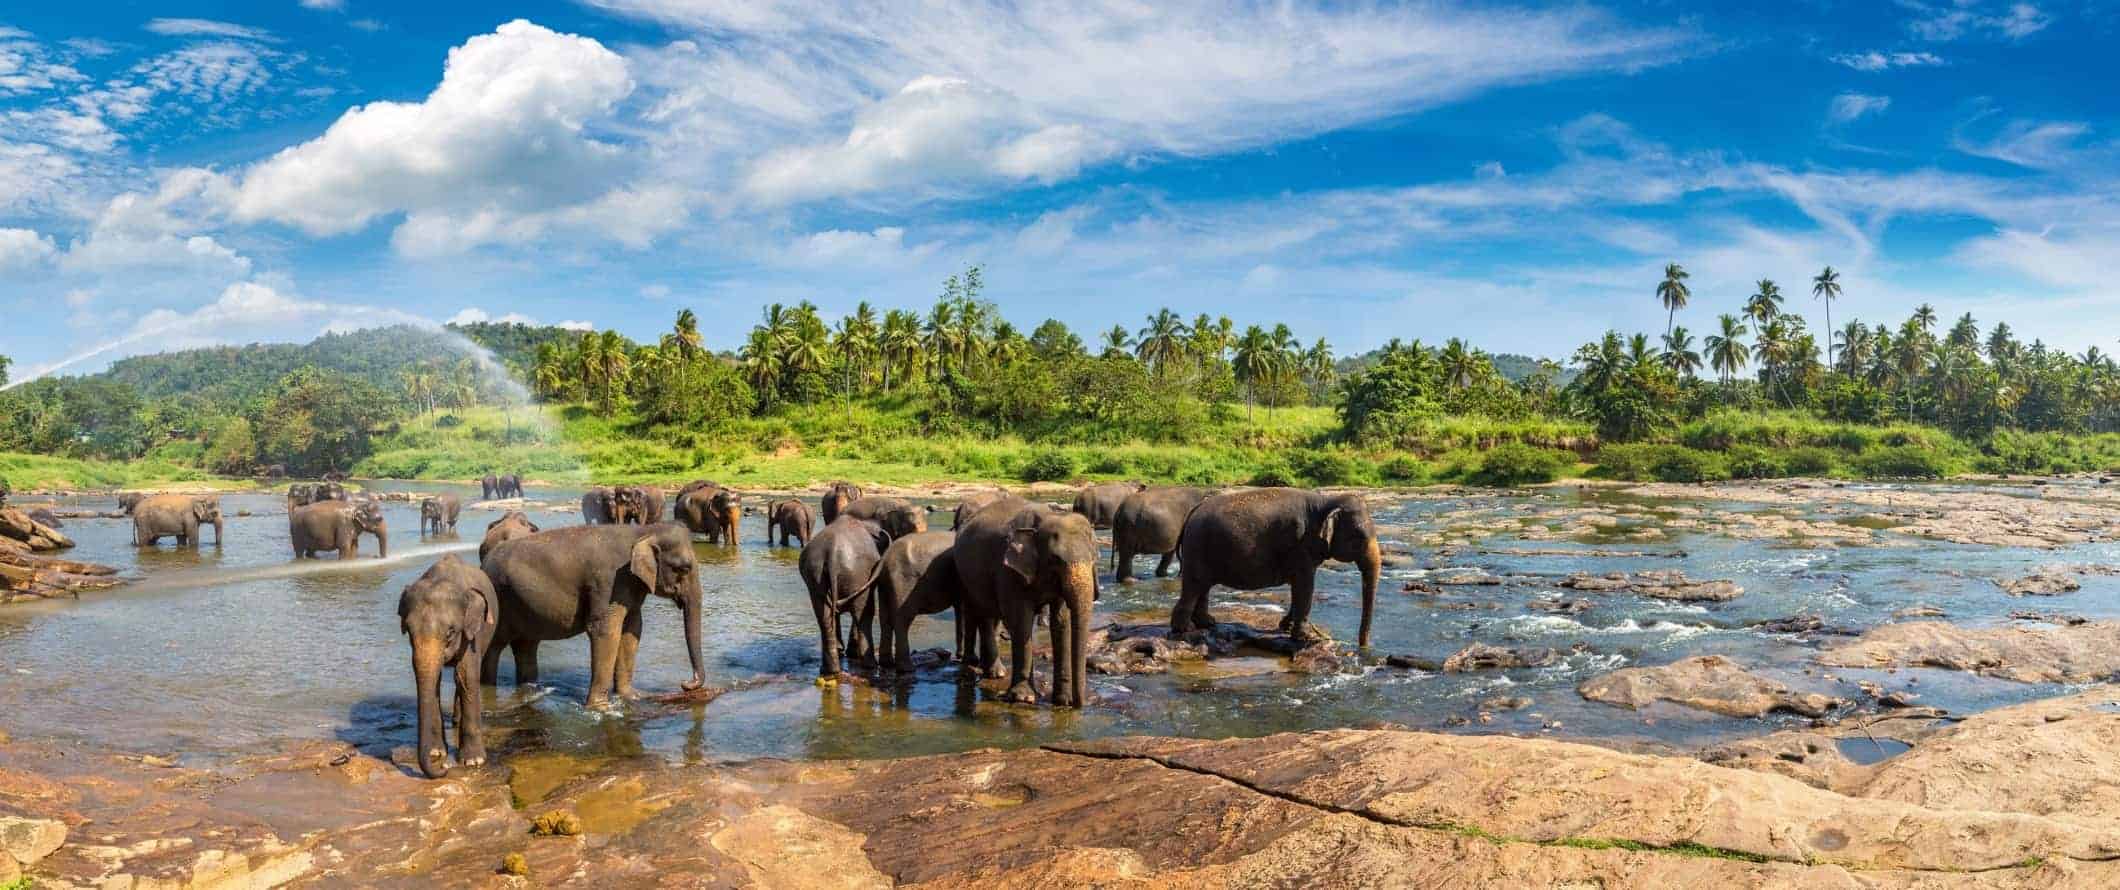 A group of elephants standing in a stream in Sri Lanka